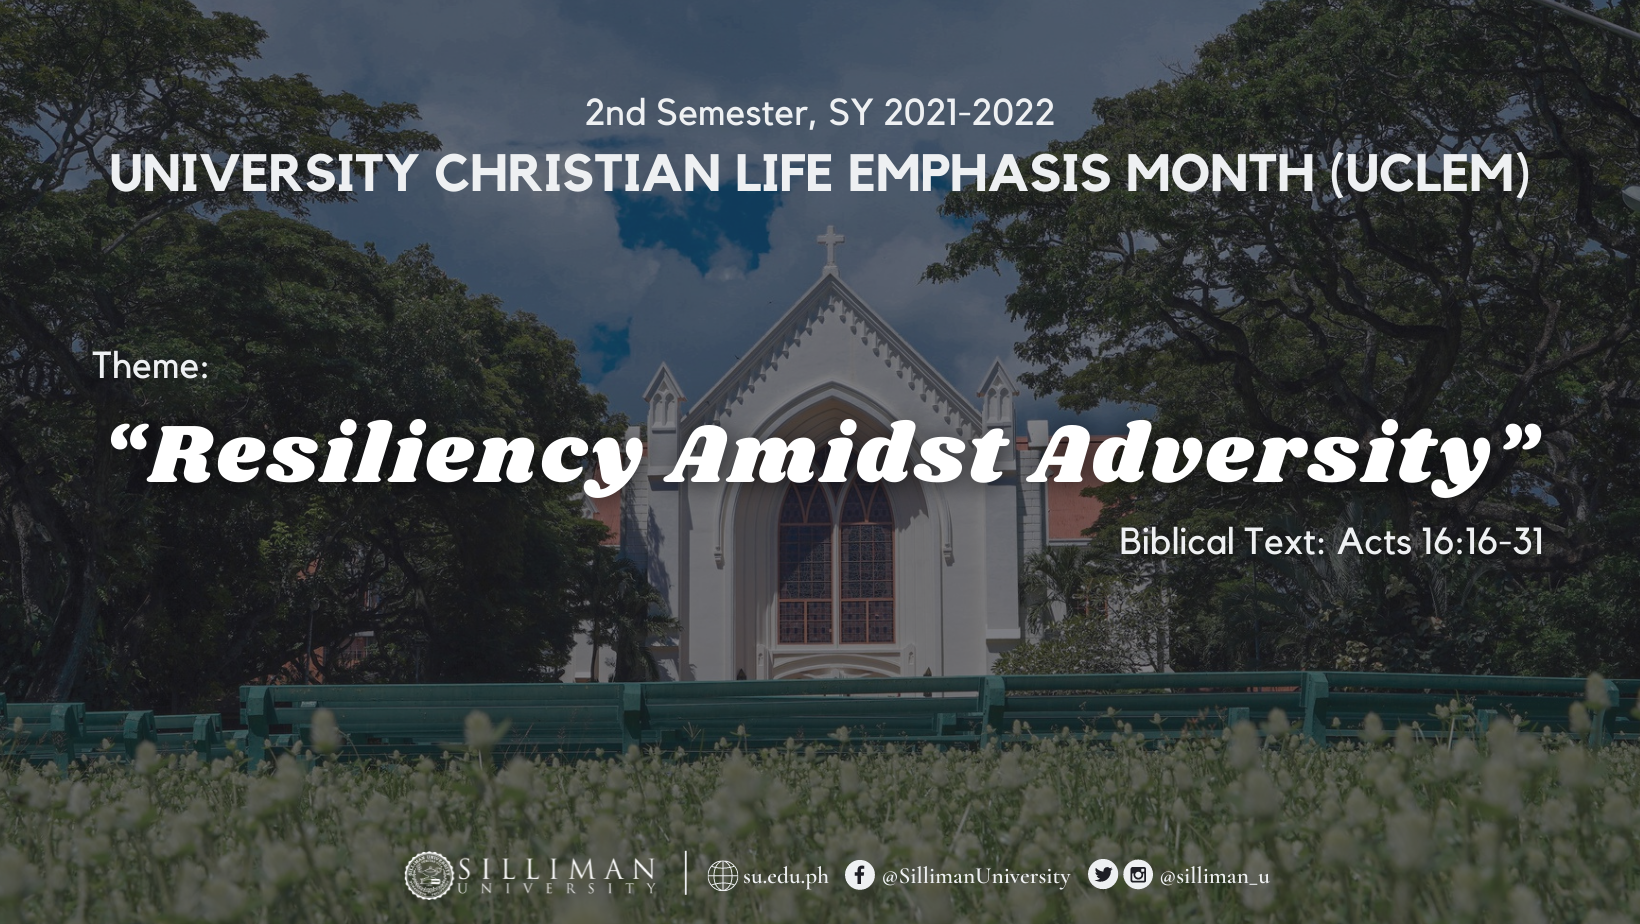 University Christian Life Emphasis Month (UCLEM) Calendar of Activities for the 2nd Semester, SY 2021-2022